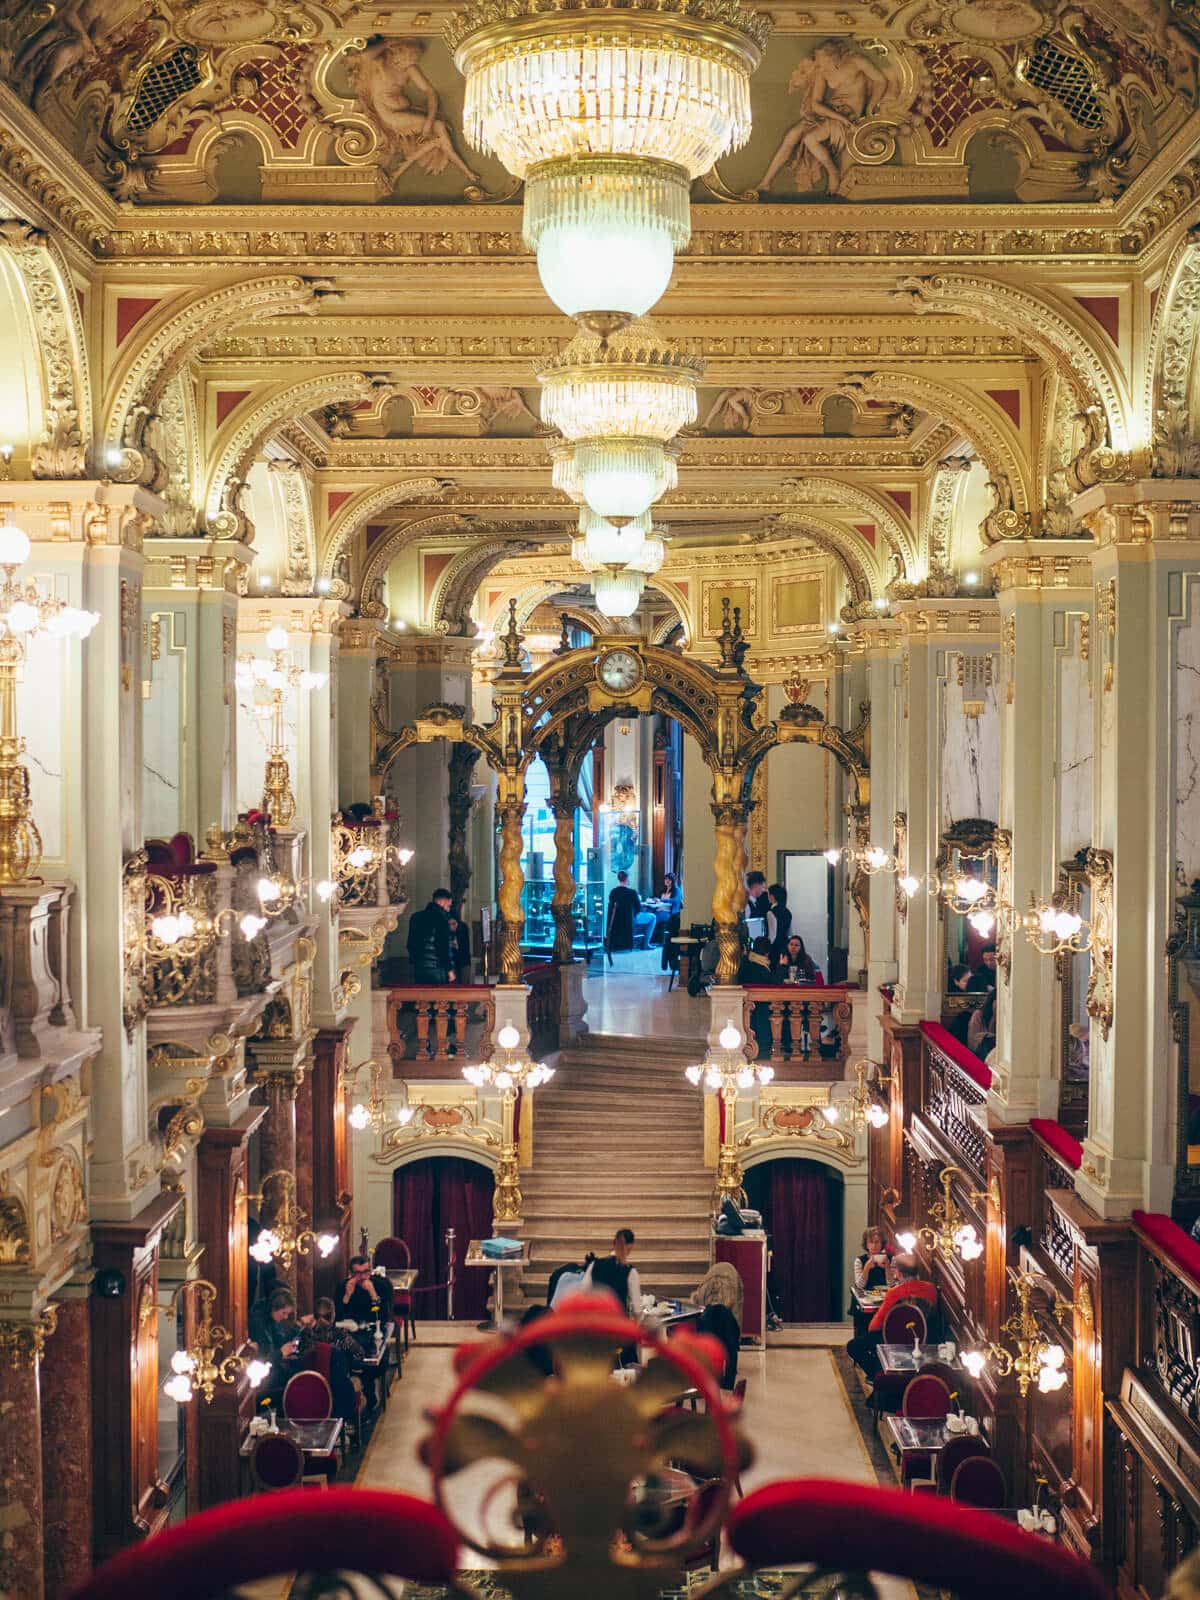 Budapest Instagrammable Places - New York Café, the most beautiful cafe in the world.